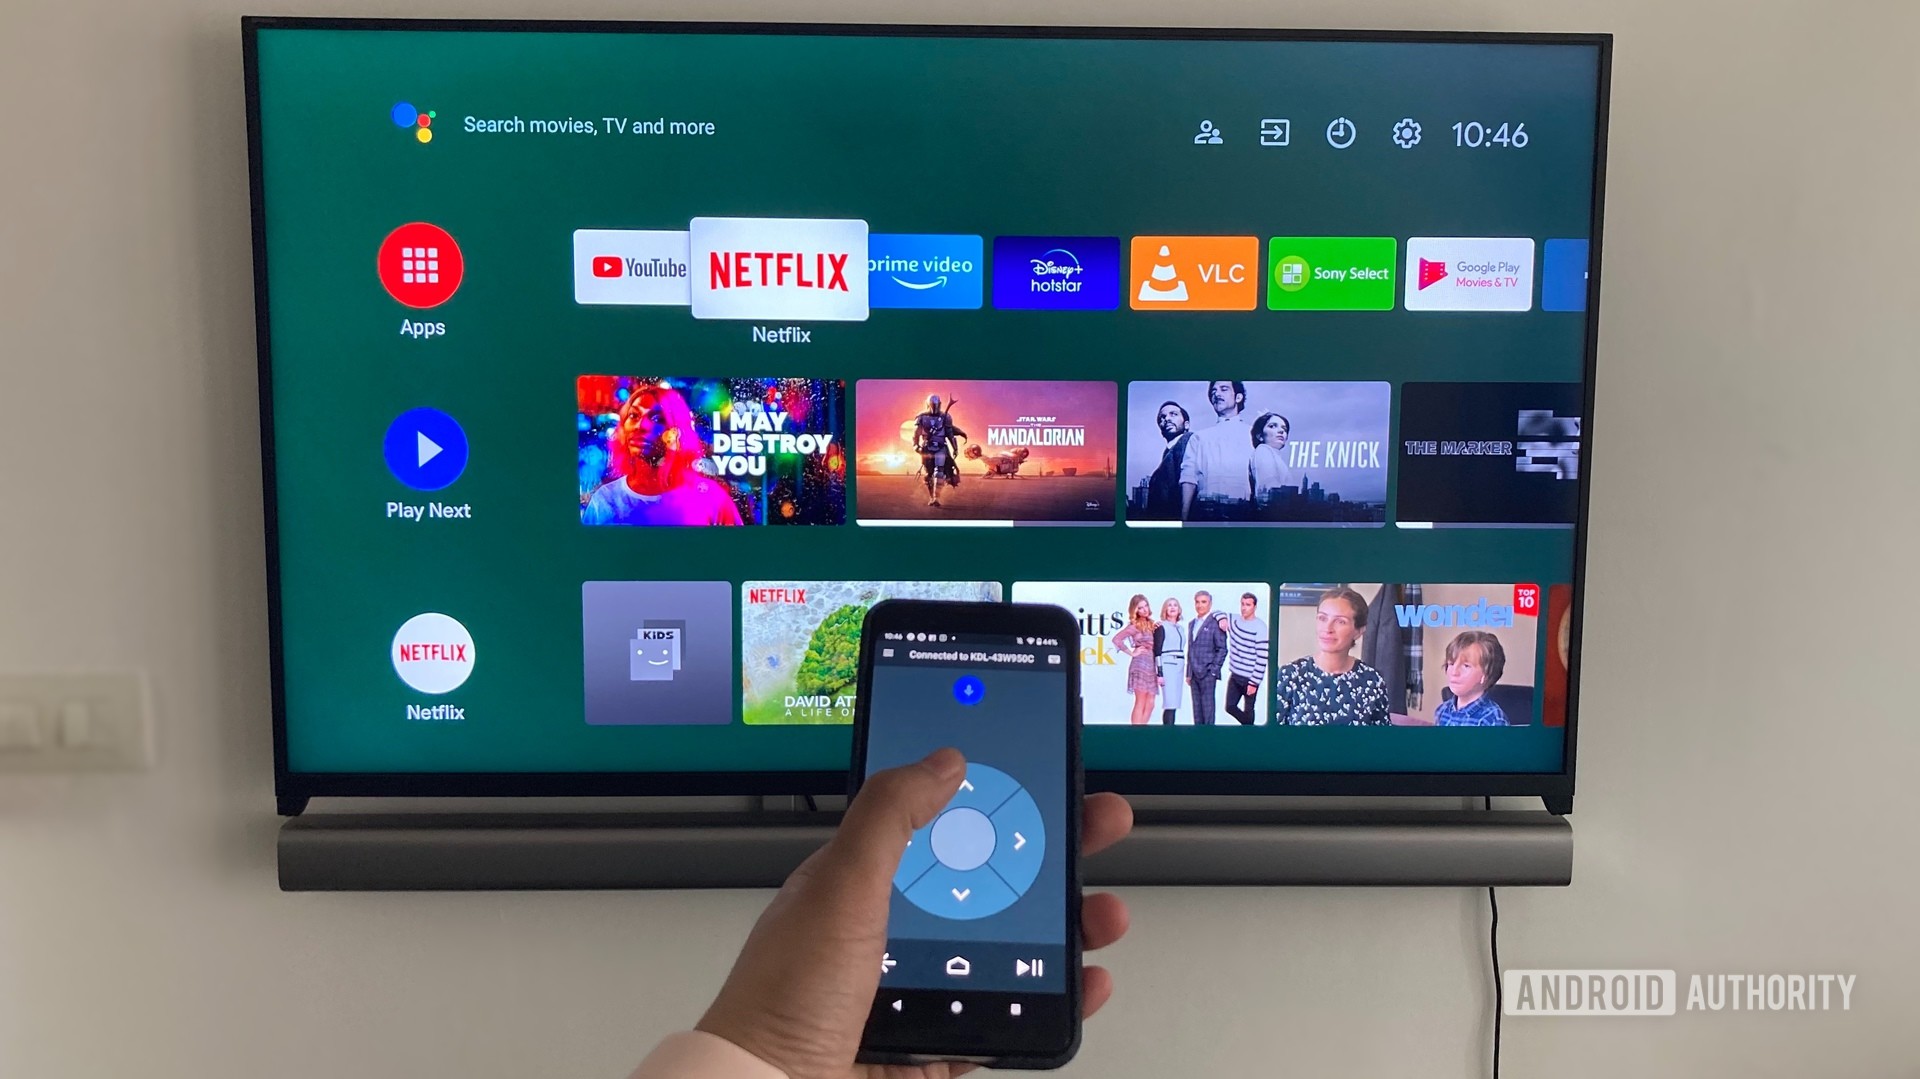 Image showing the Android TV Remote control app on a smartphone in front of an Android TV